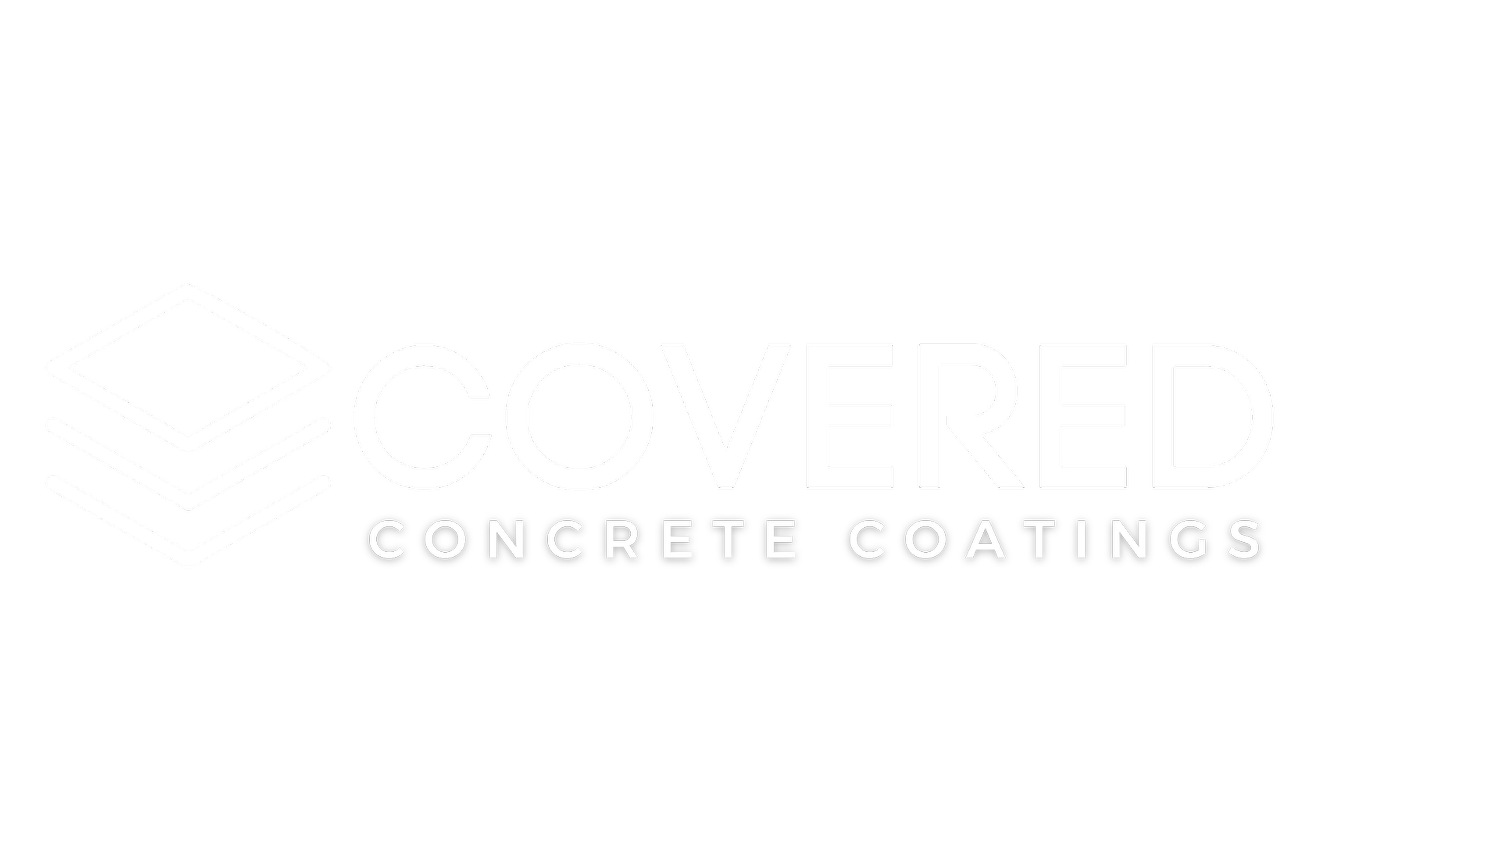 Covered Concrete Coatings